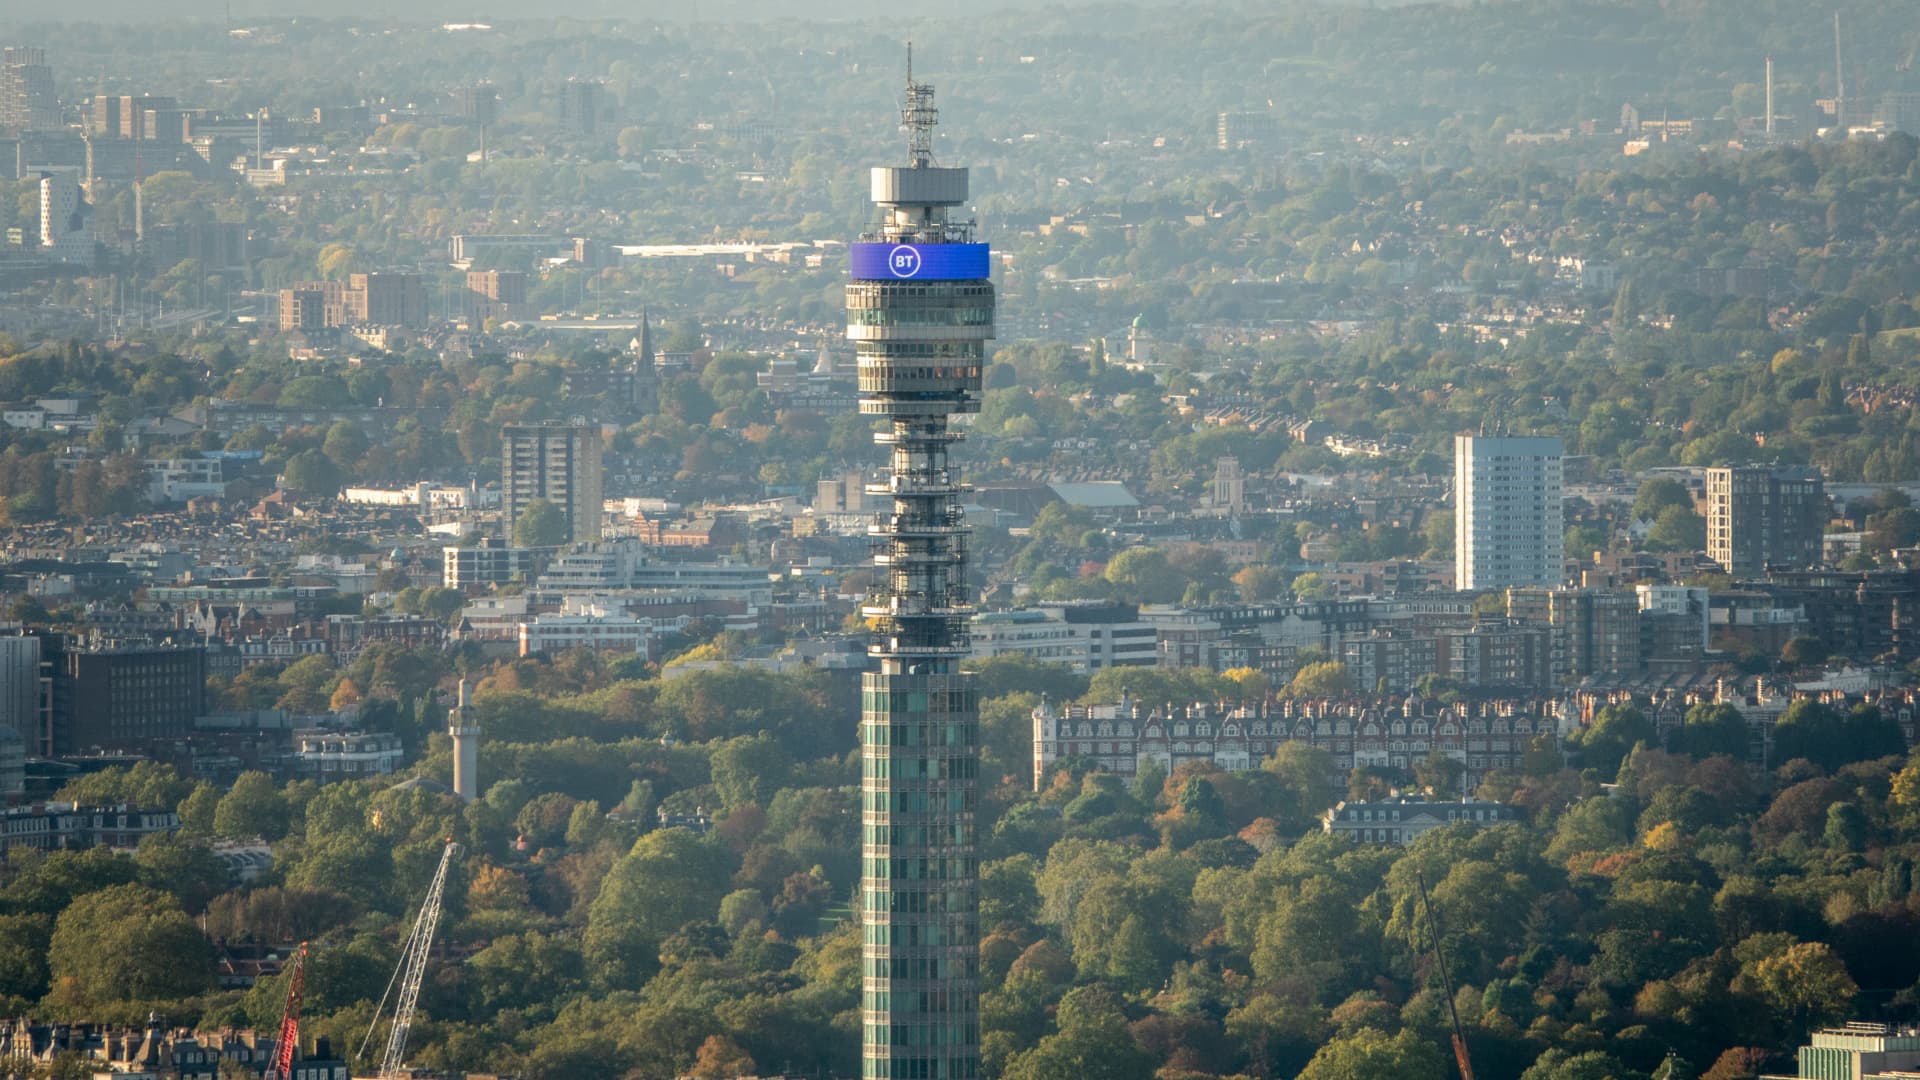 London's famed BT Tower sold to U.S. hotel group for $347 million